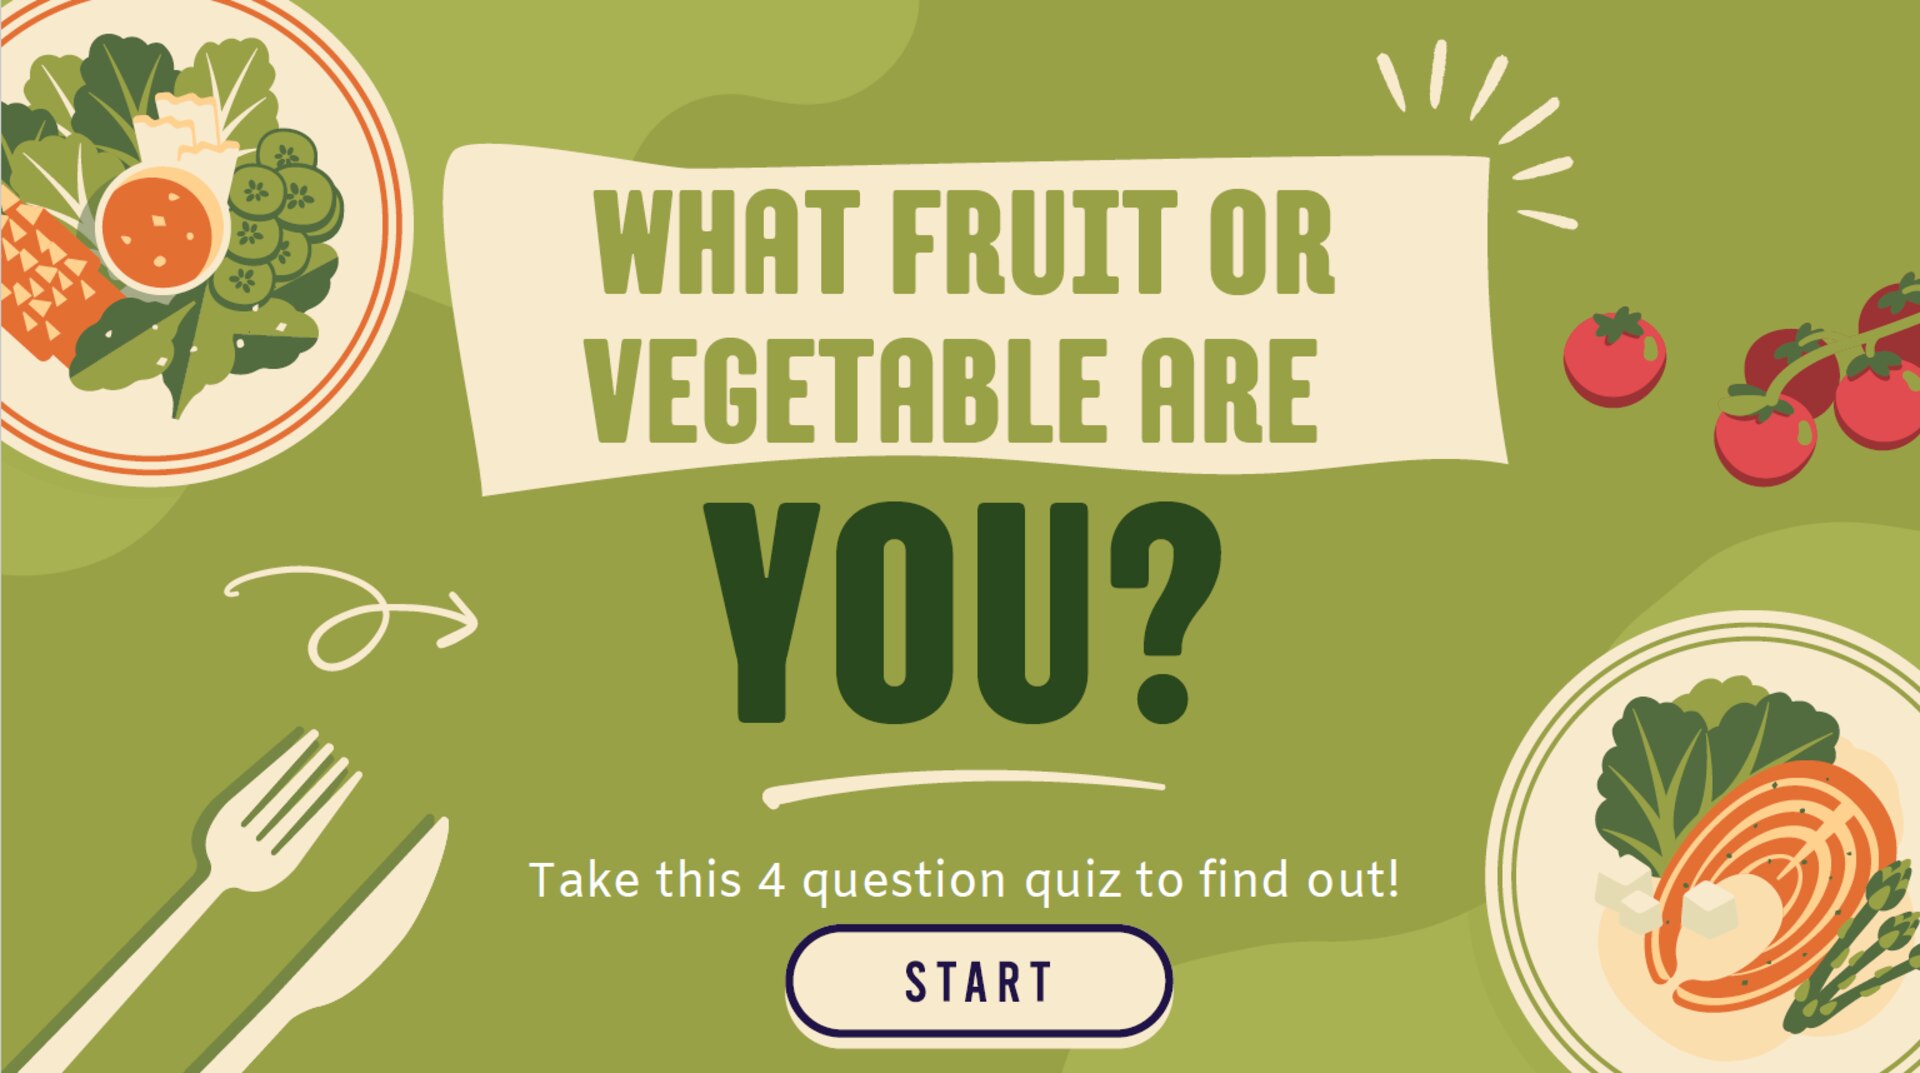 What Fruit or Vegetable Are You?